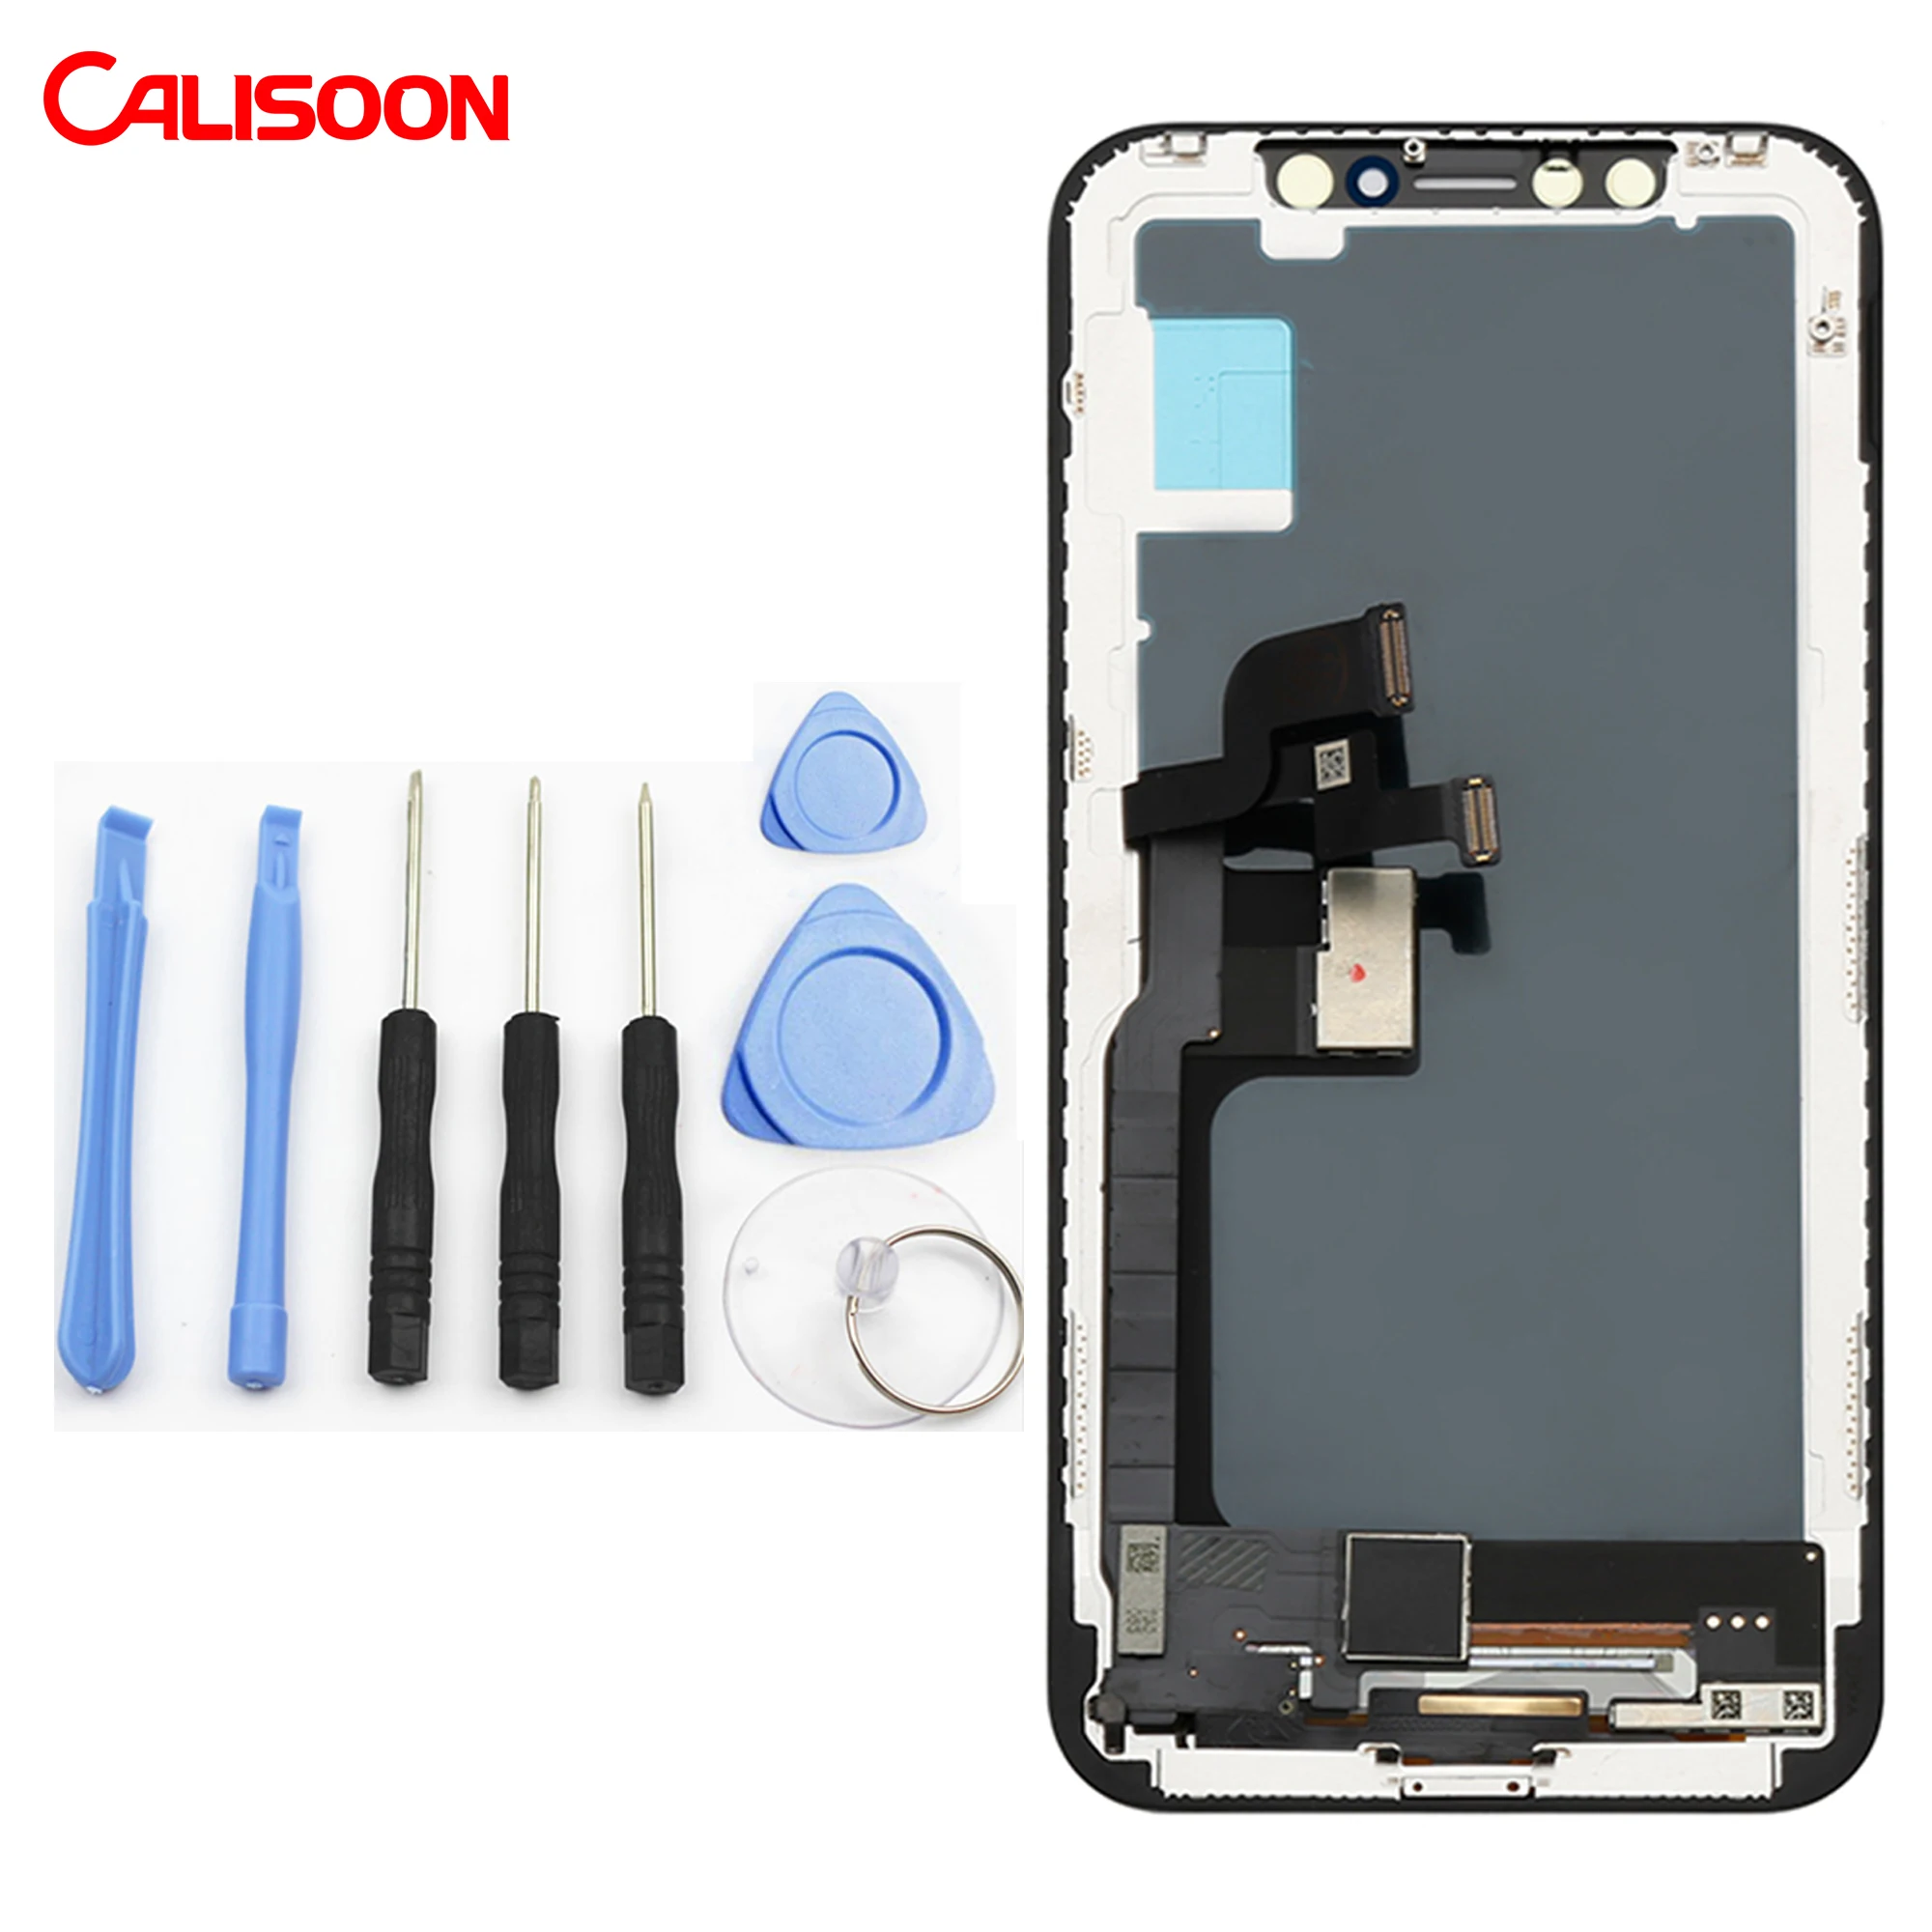 

Calisoon Screen Replacement for iphone 5 5s 6 6s 7 8 X LCD display Digitizer Assembly with repair tools, White, black